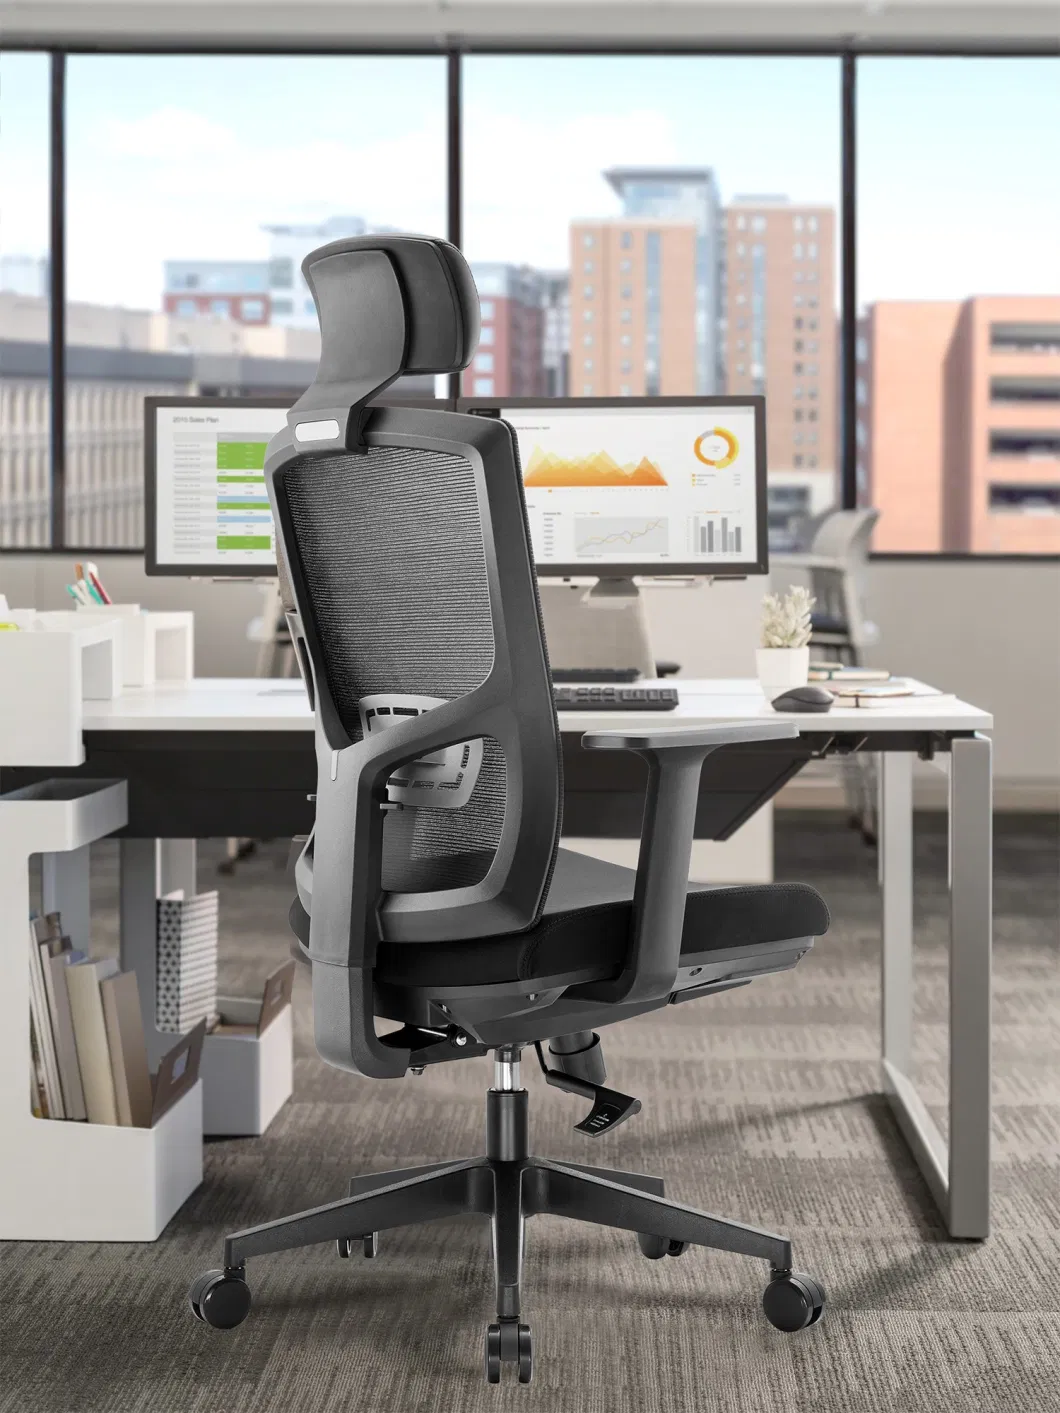 Modern Computer Executive Conference Ergonomic Beauty Home Swivel Visitor Study Game Revolving Reception Cheap Fabric Office Chair Furniture Basic Customization